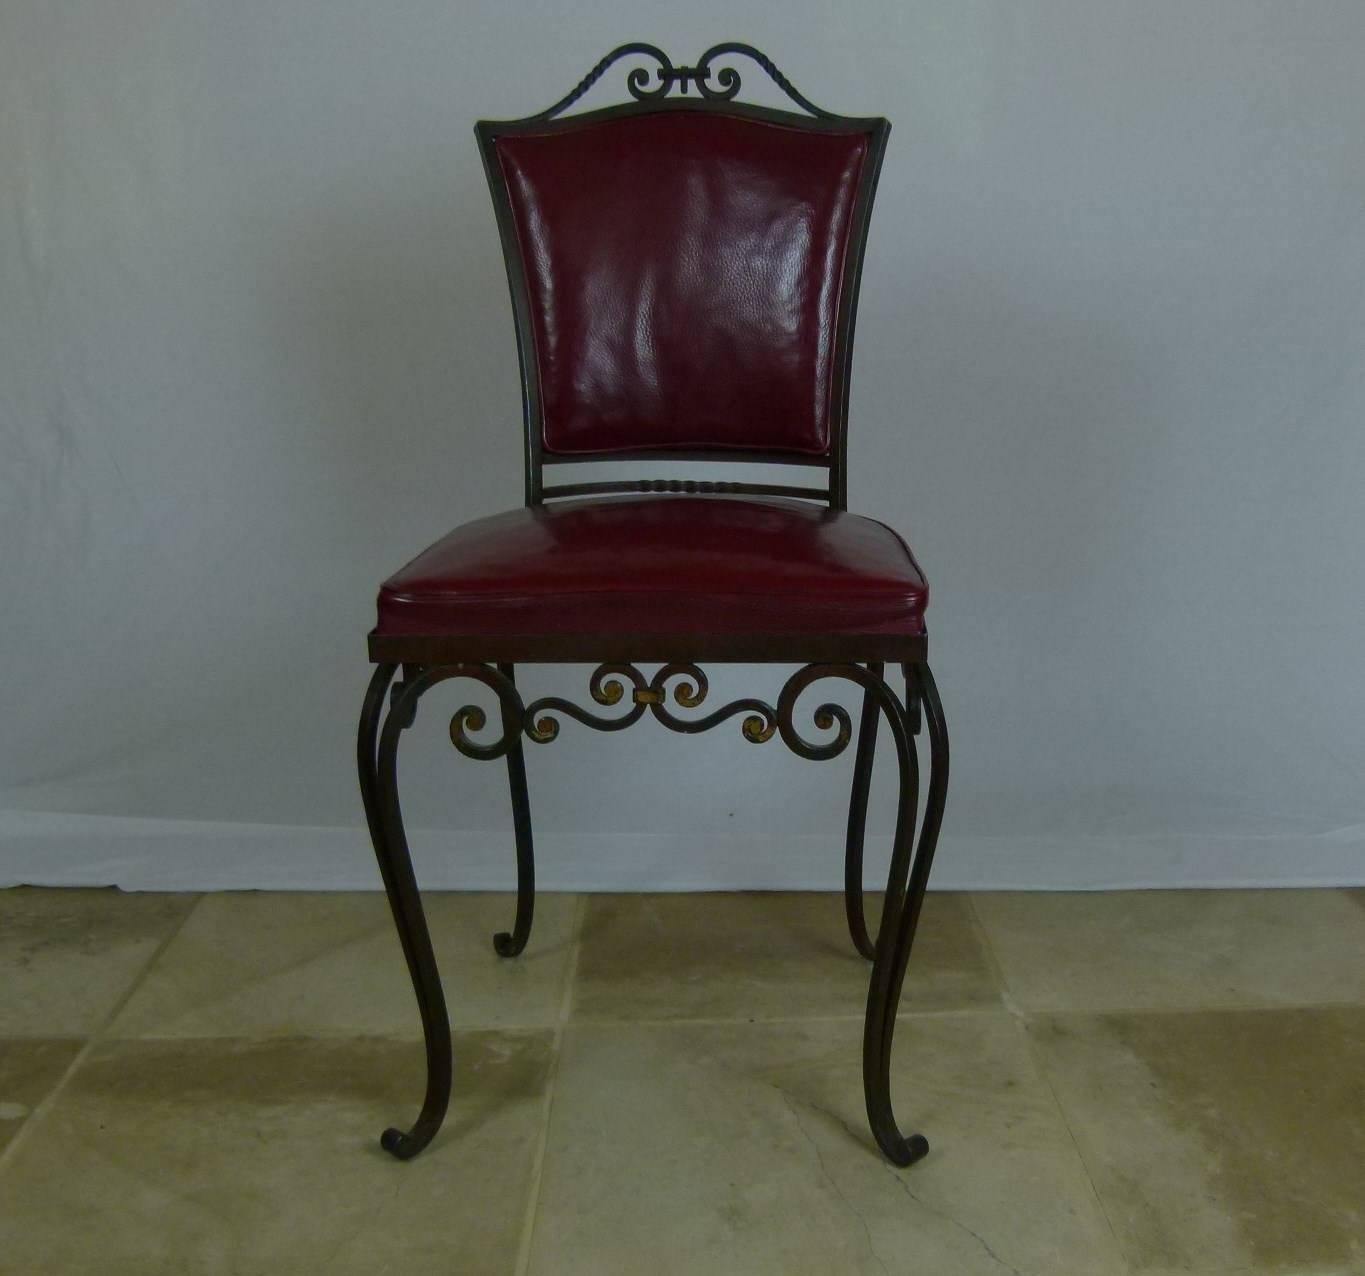 Set of four armchairs and two table chairs in wrought iron and leather, consisting of a wrought iron and hammered frame made without any welding. Patina of origin.
Upholstered seats in new dark red leather.
Jean Charles Moreux's 1935 French work